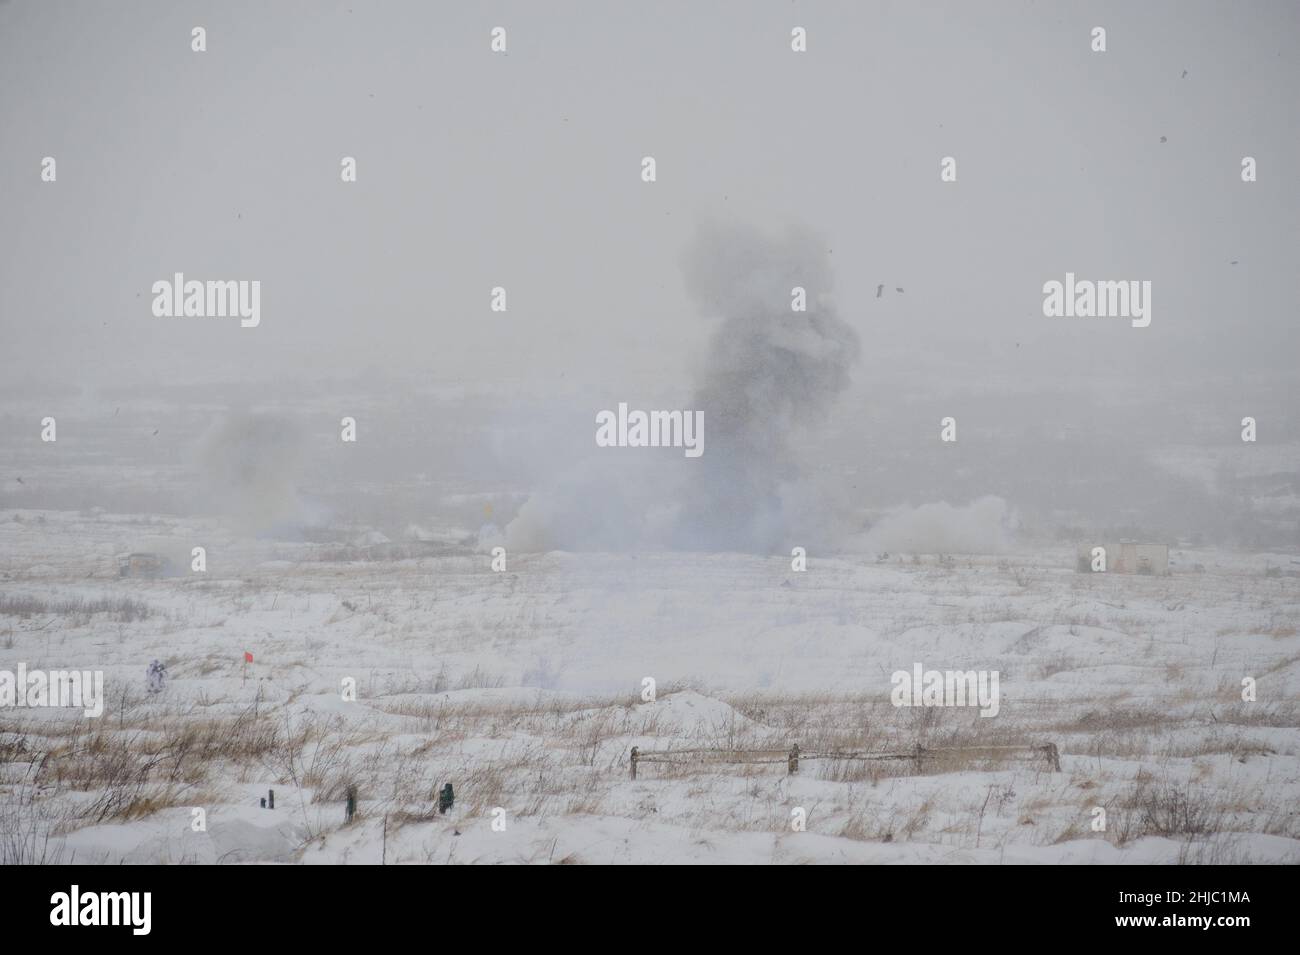 Lviv, Ukraine 28 January 2022. Explosion, neutralization of the target seen during practical launches of NLAW ATGM at the International Center for Peacekeeping and Security of the National Academy of Land Forces. Stock Photo